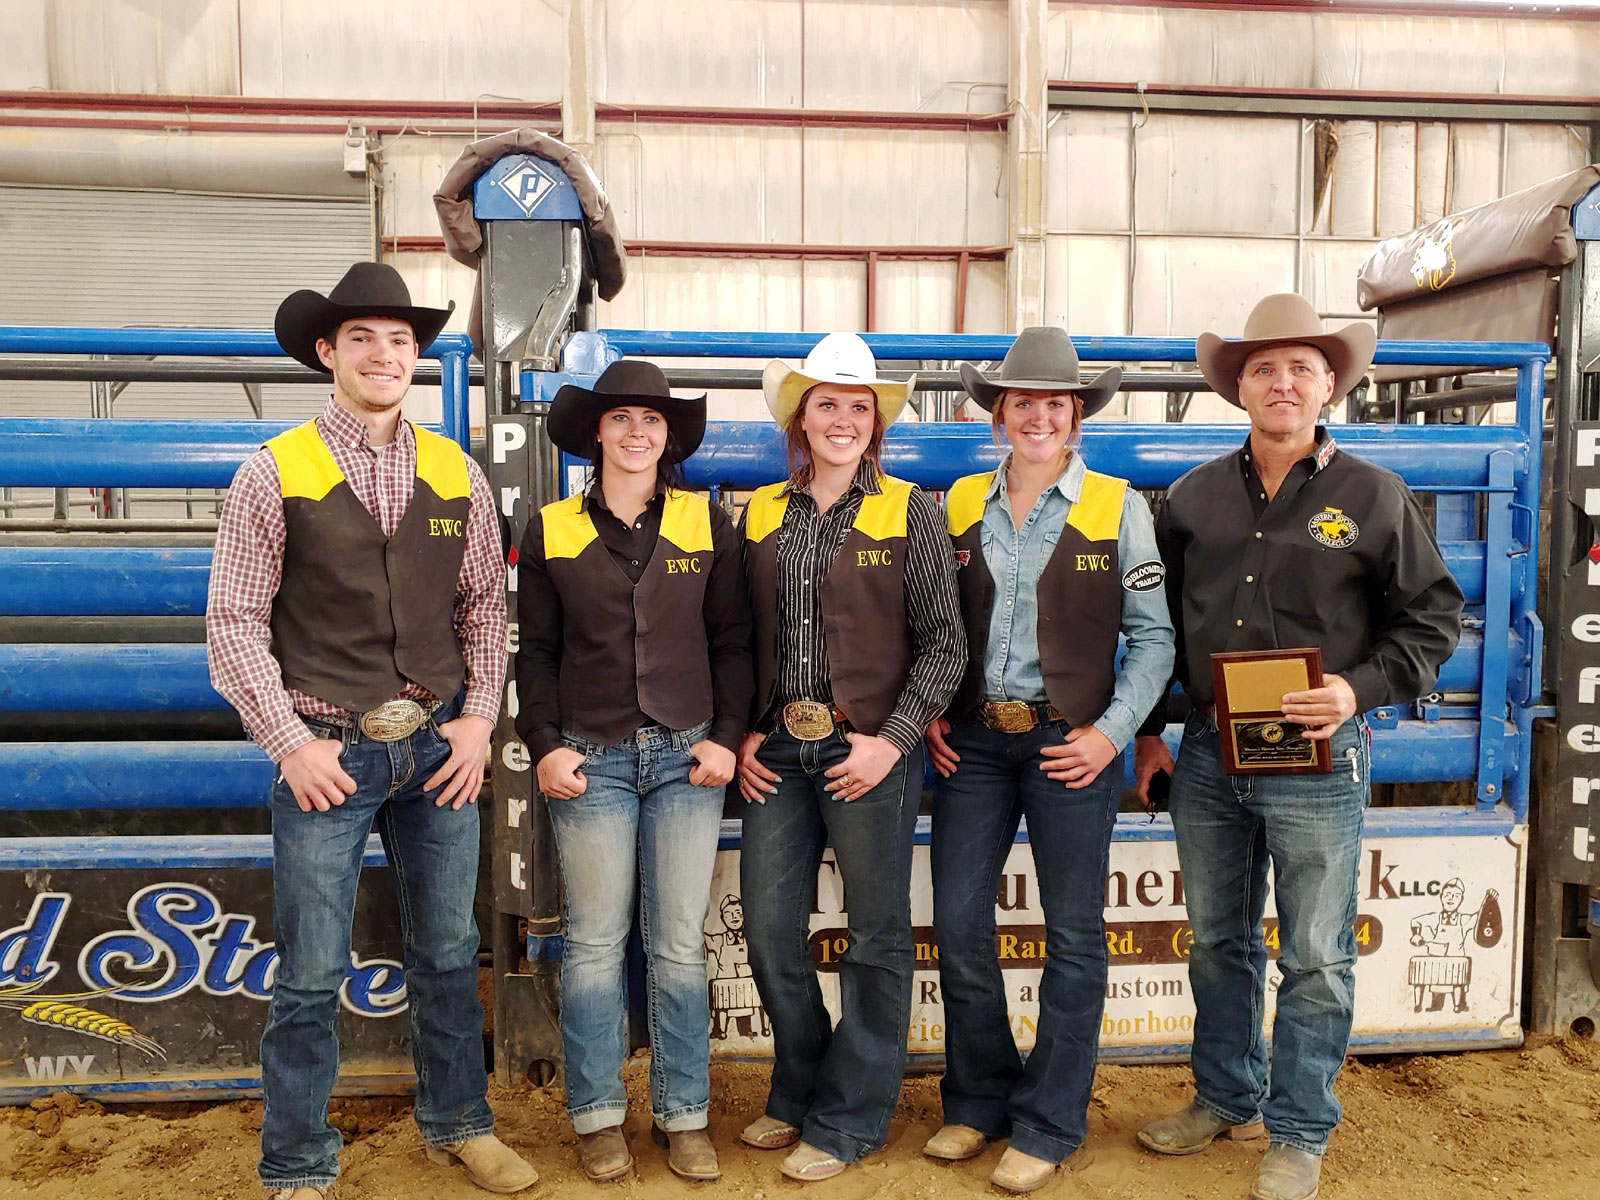 2019 CNFR qualifiers (left to right): Chadron Coffield, Karissa Rayhill, Brooke Glass, Jacey Thompson, and Coach Jake Clark.